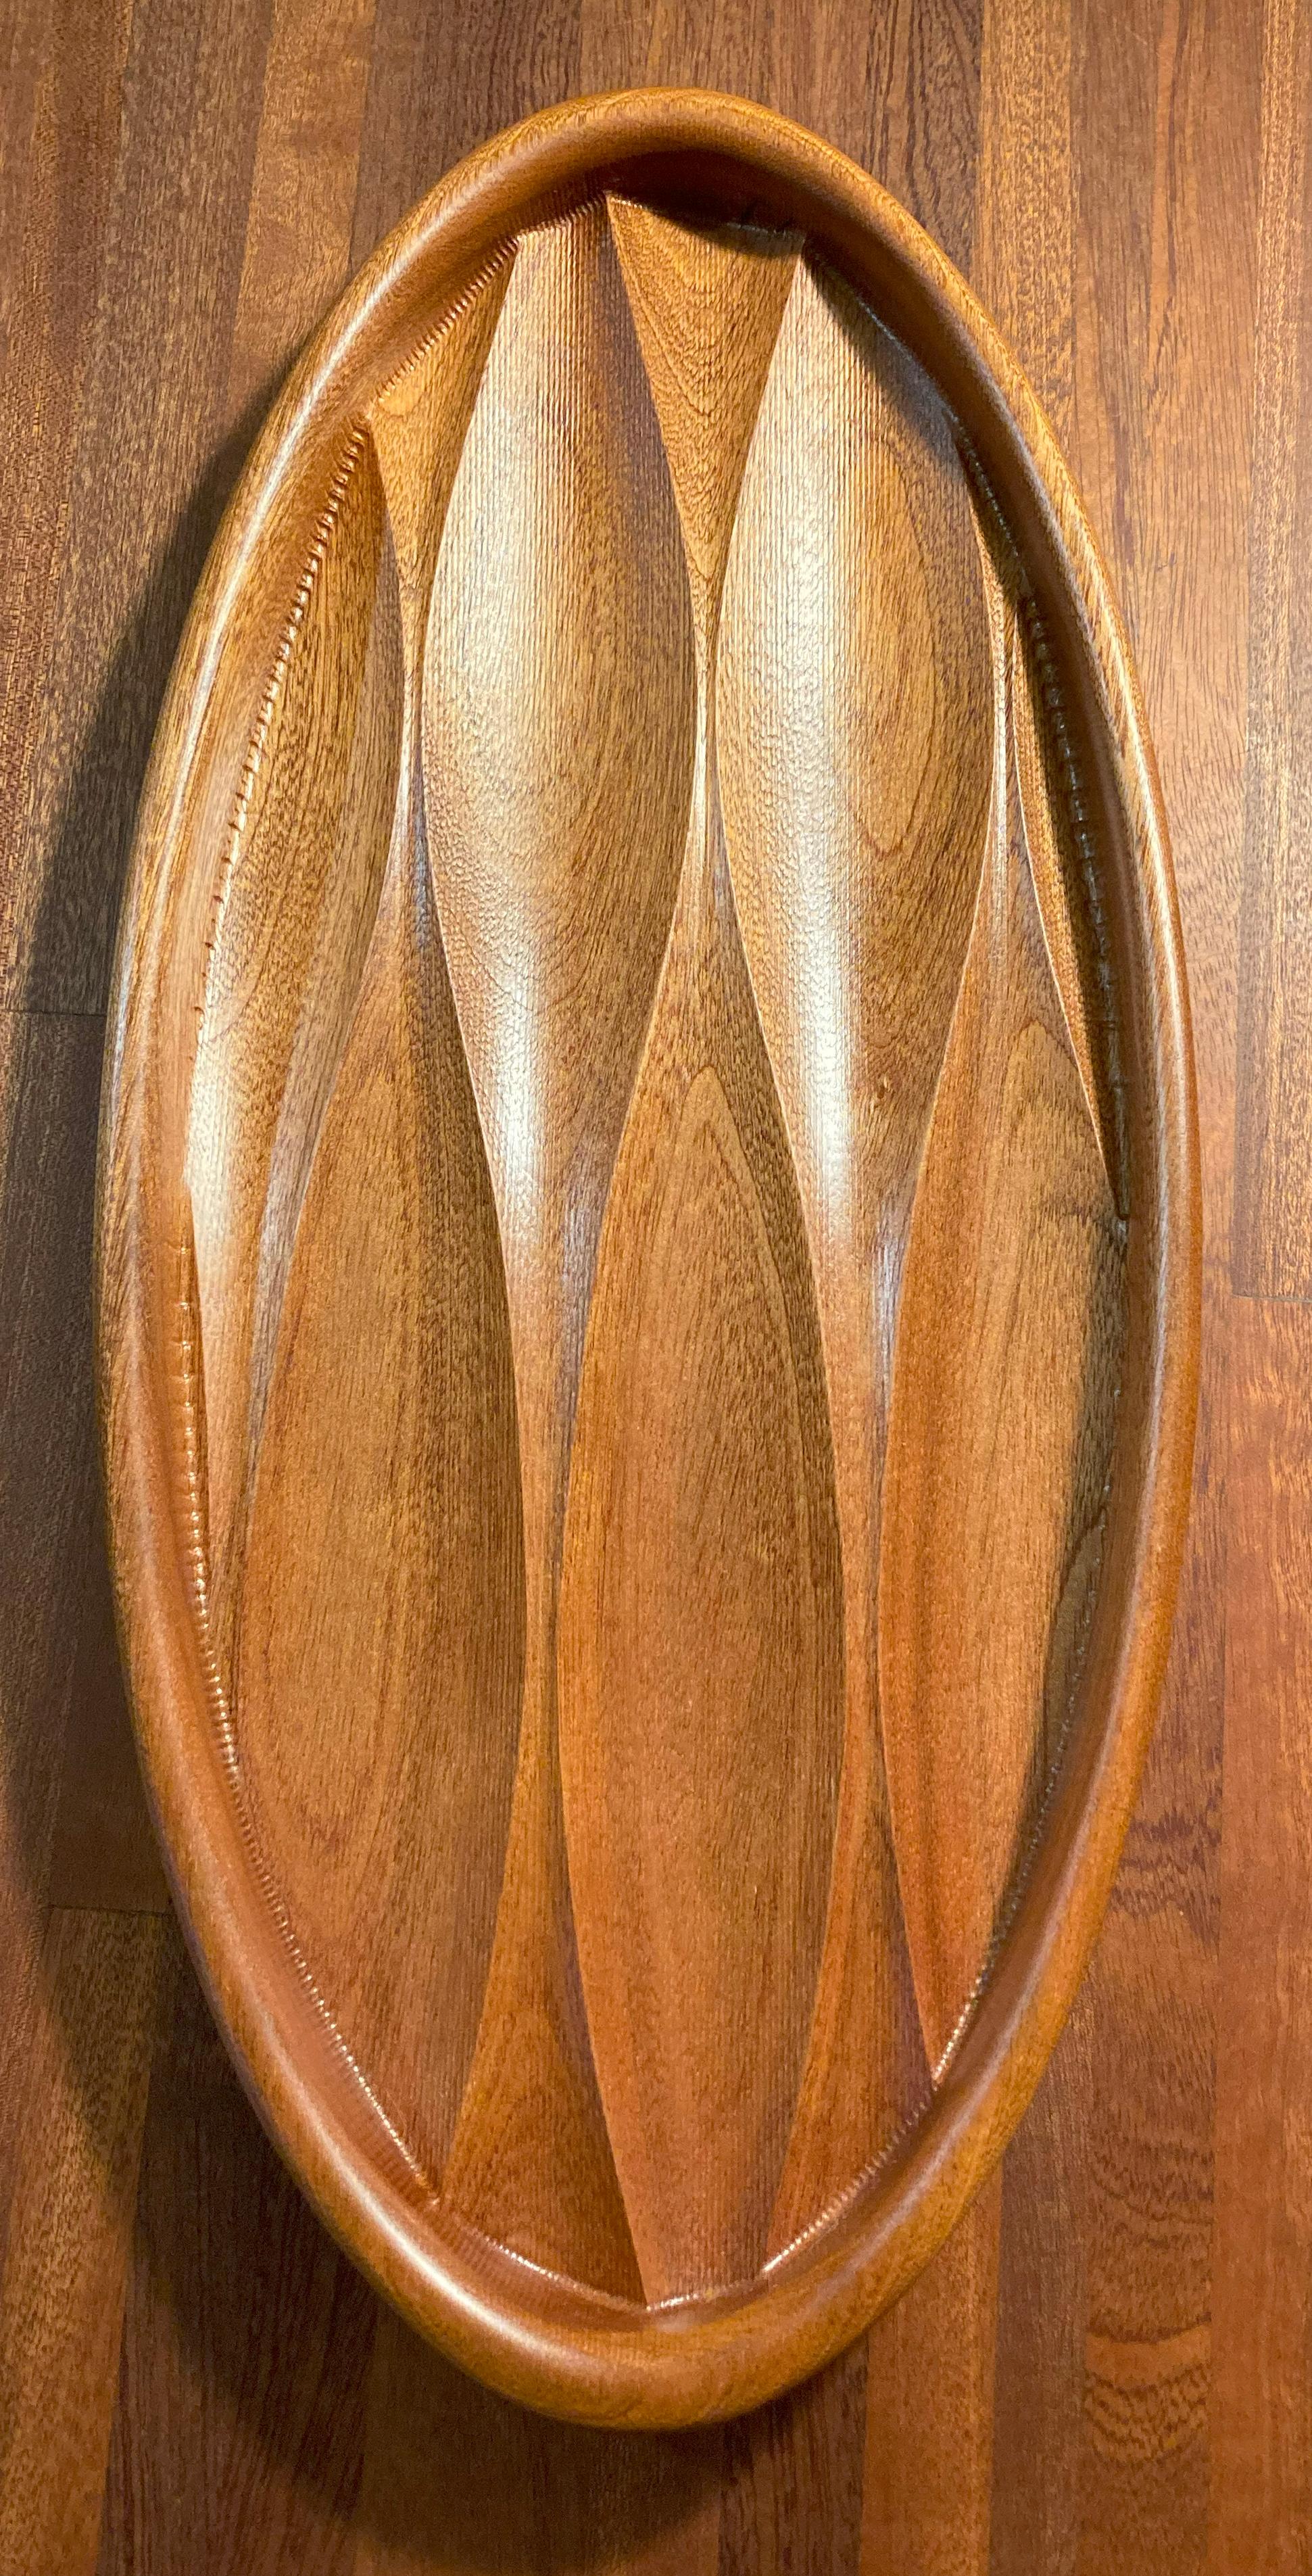 This stylish artisan wood valet tray, vanity tray or catchall tray for home, office, dresser or kitchen is  a collectable among home decorators.  For home, office, dresser or kitchen made just for you from solid natural golden red Sapele wood. The